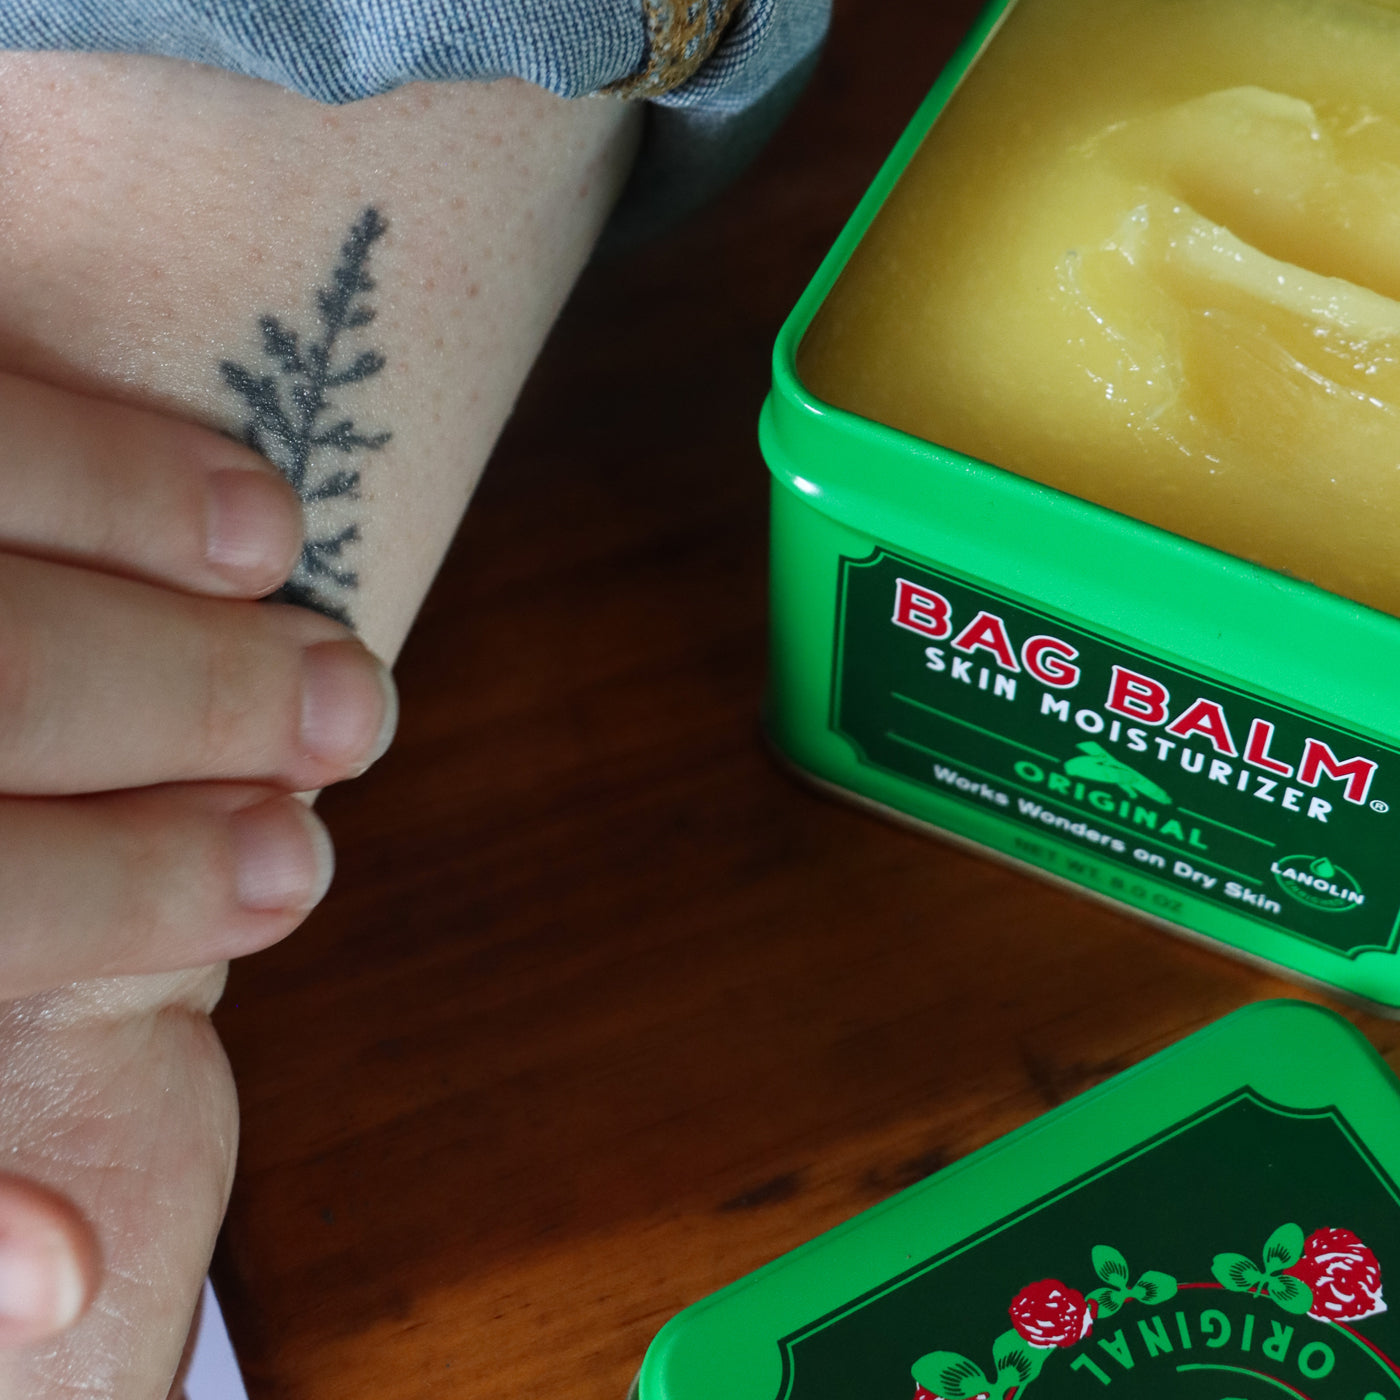 An open tin of Bag Balm being applied to a floral tattoo